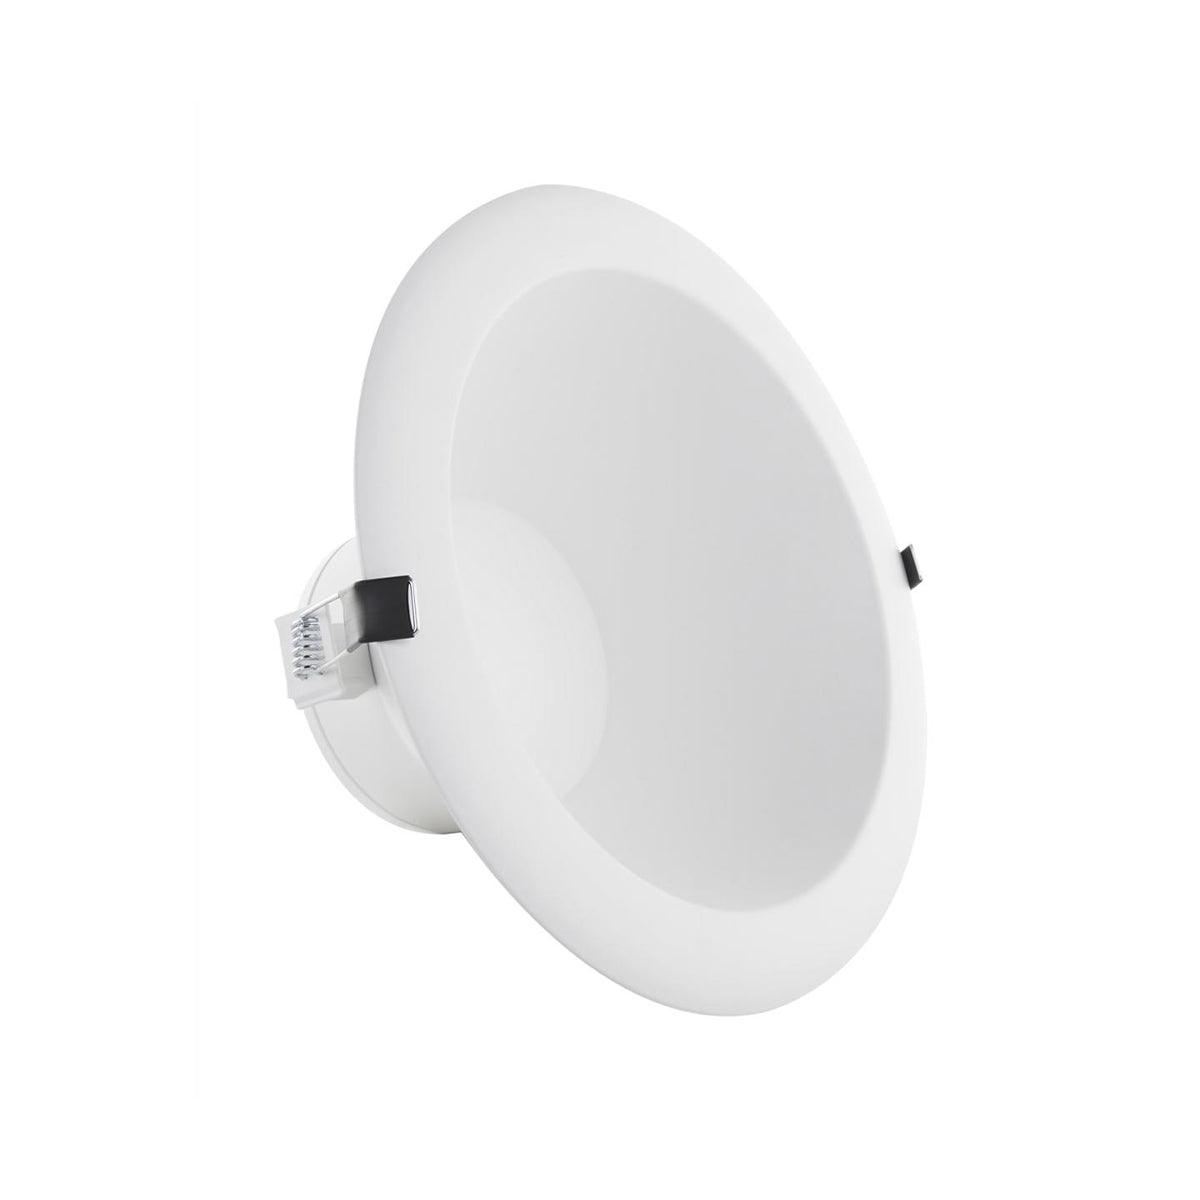 4 In. Commercial Canless LED Recessed Light, 15 Watt, 1020 Lumens, Selectable CCT, 2700K to 5000K, White Finish